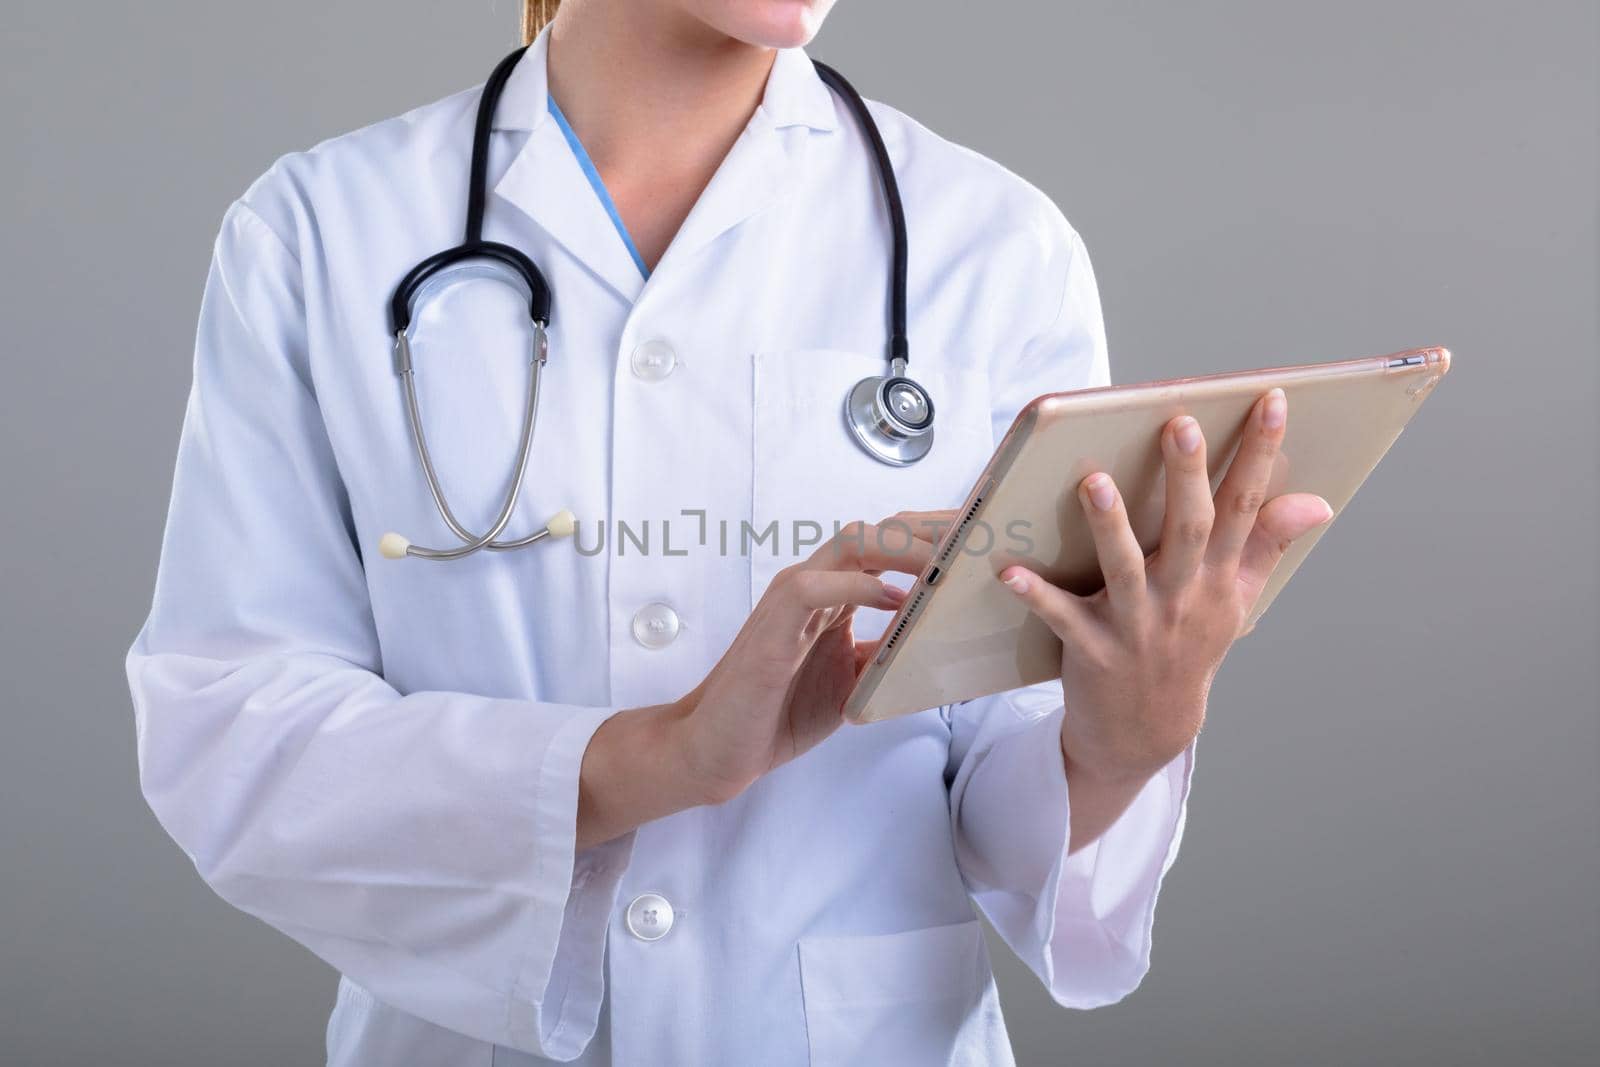 Midsection of caucasian female doctor using tablet, isolated on grey background. medical and healthcare services concept.